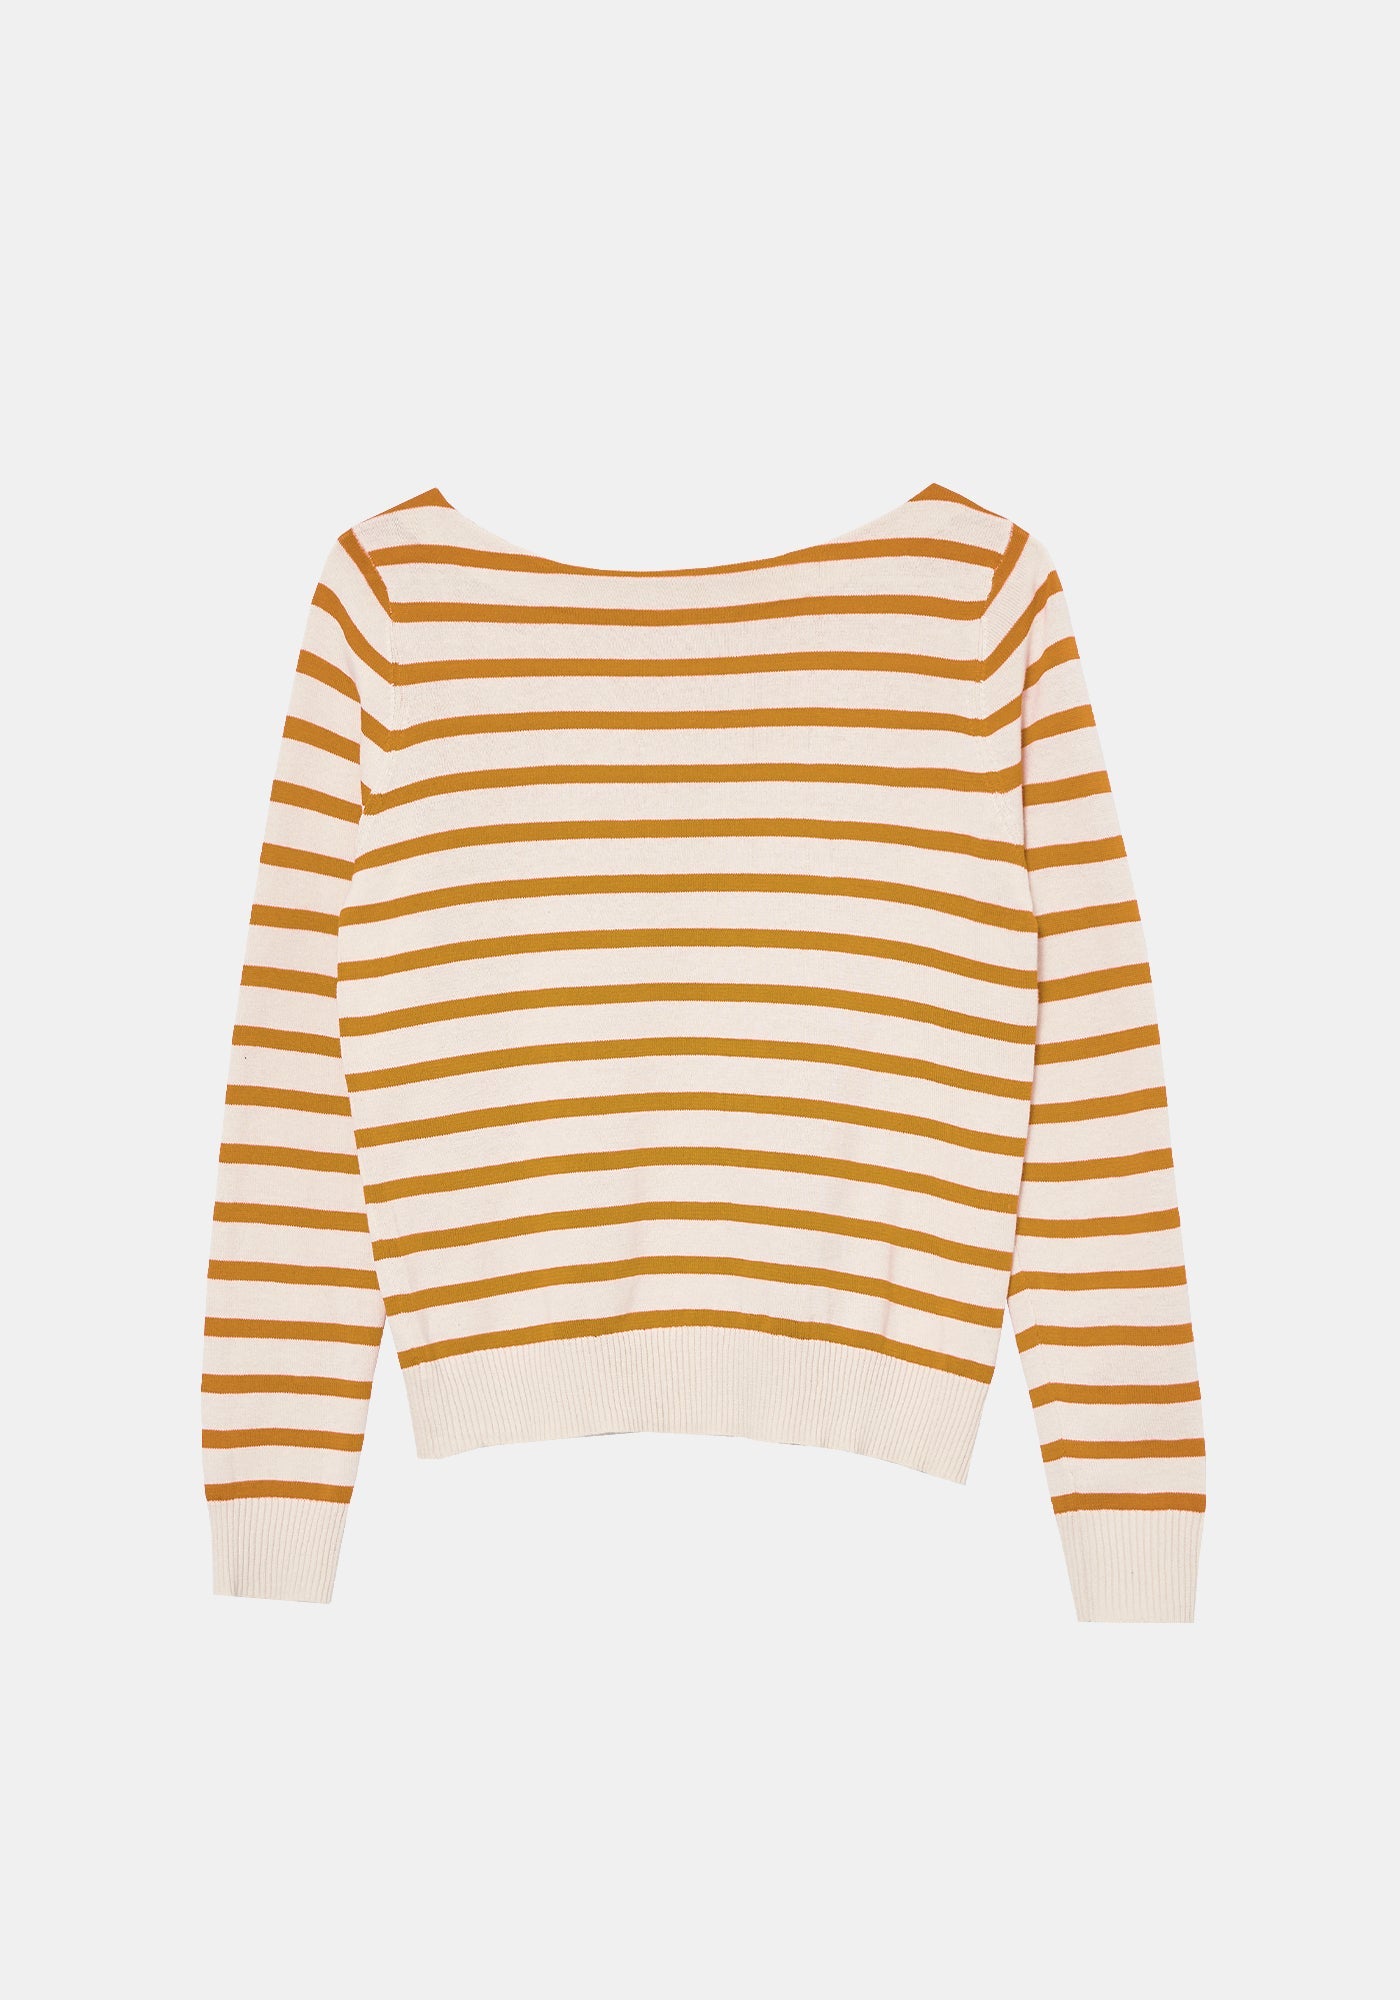 Beckie Stripe Top - Parchment / Toast